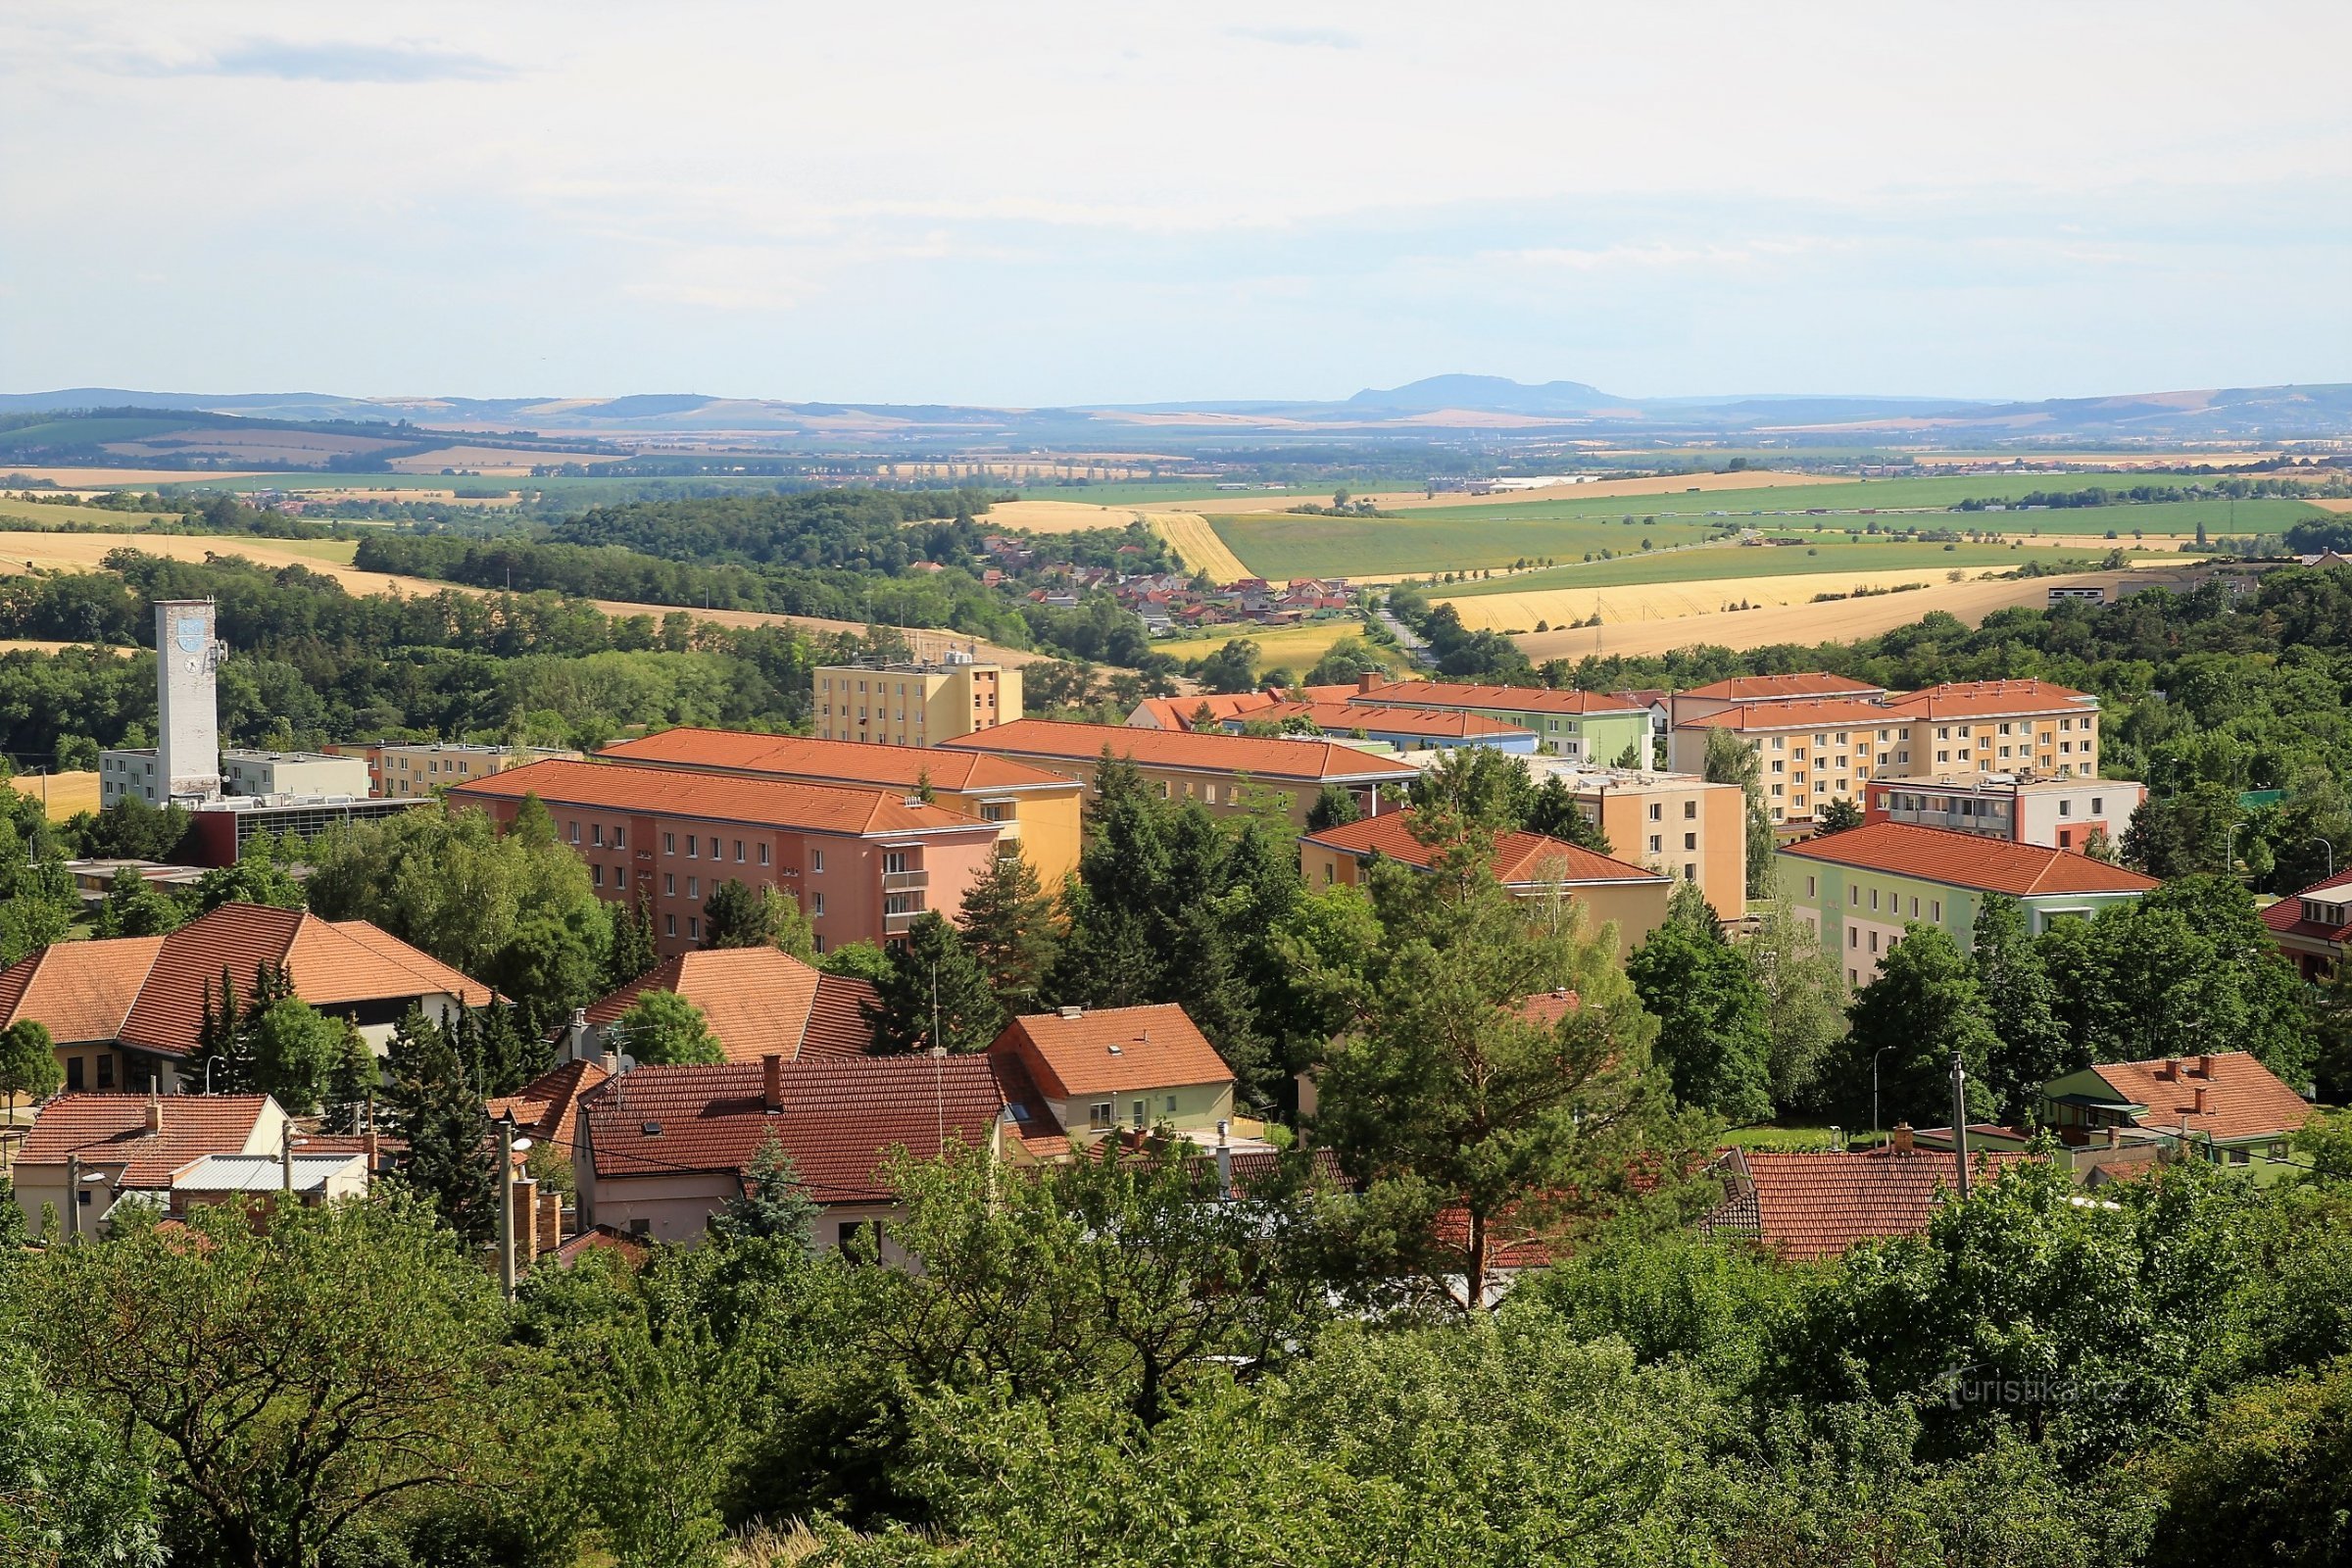 In the foreground is the housing estate in Mokré, behind it the South Moravian plains and on the horizon